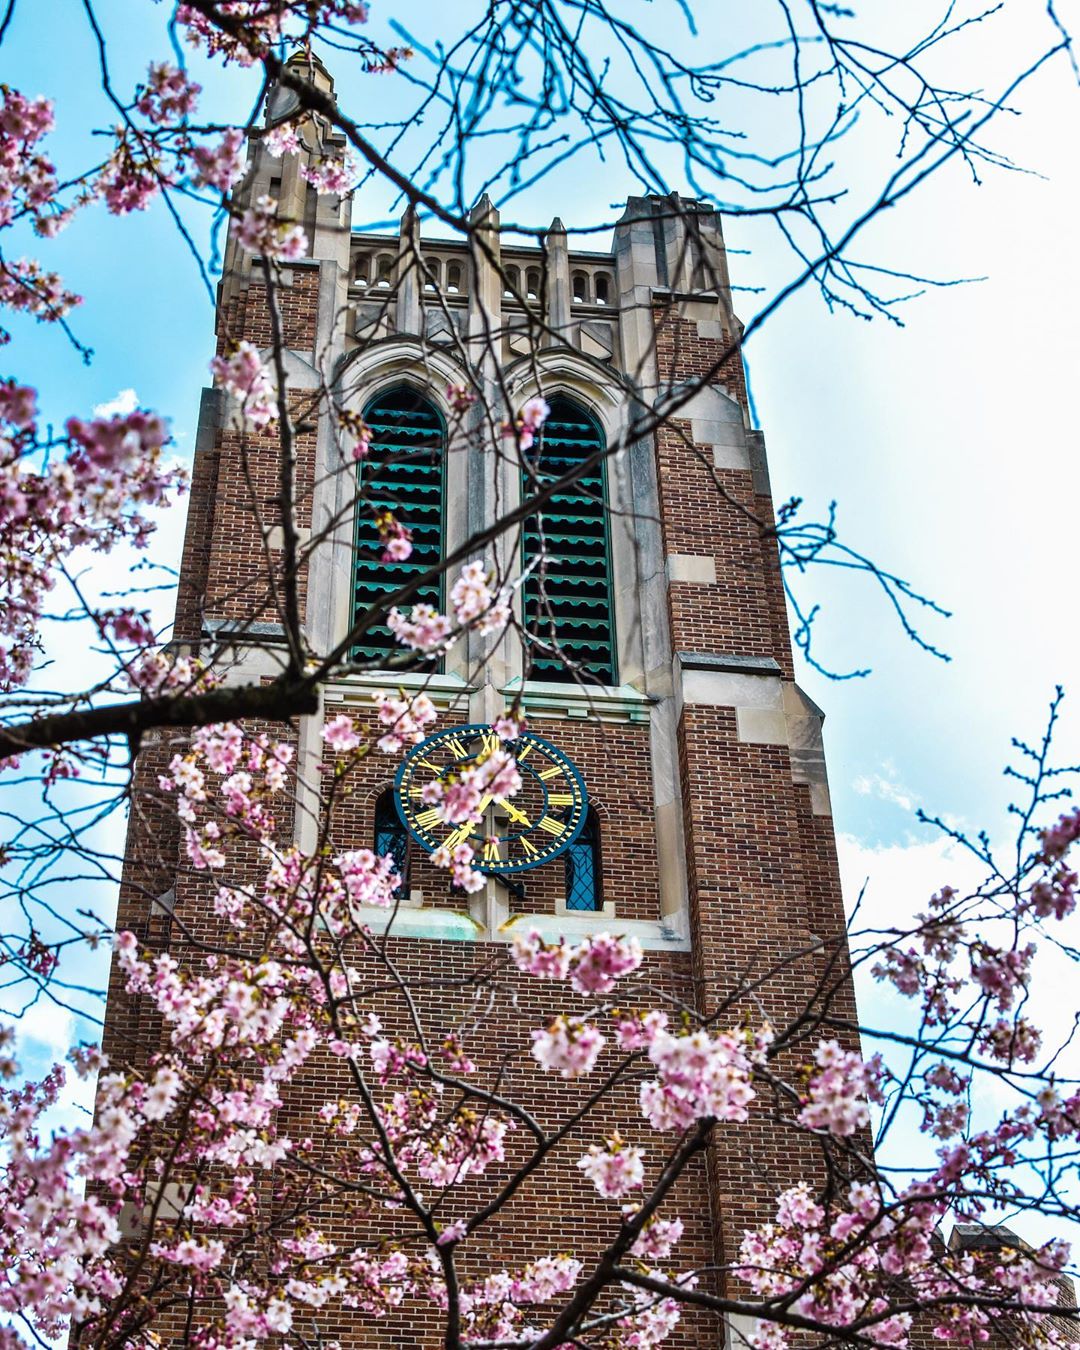 Photo of Beaumont Tower on Michigan State University Campus in East Lansing, MI. Photo by Instagram user @zafiephotography